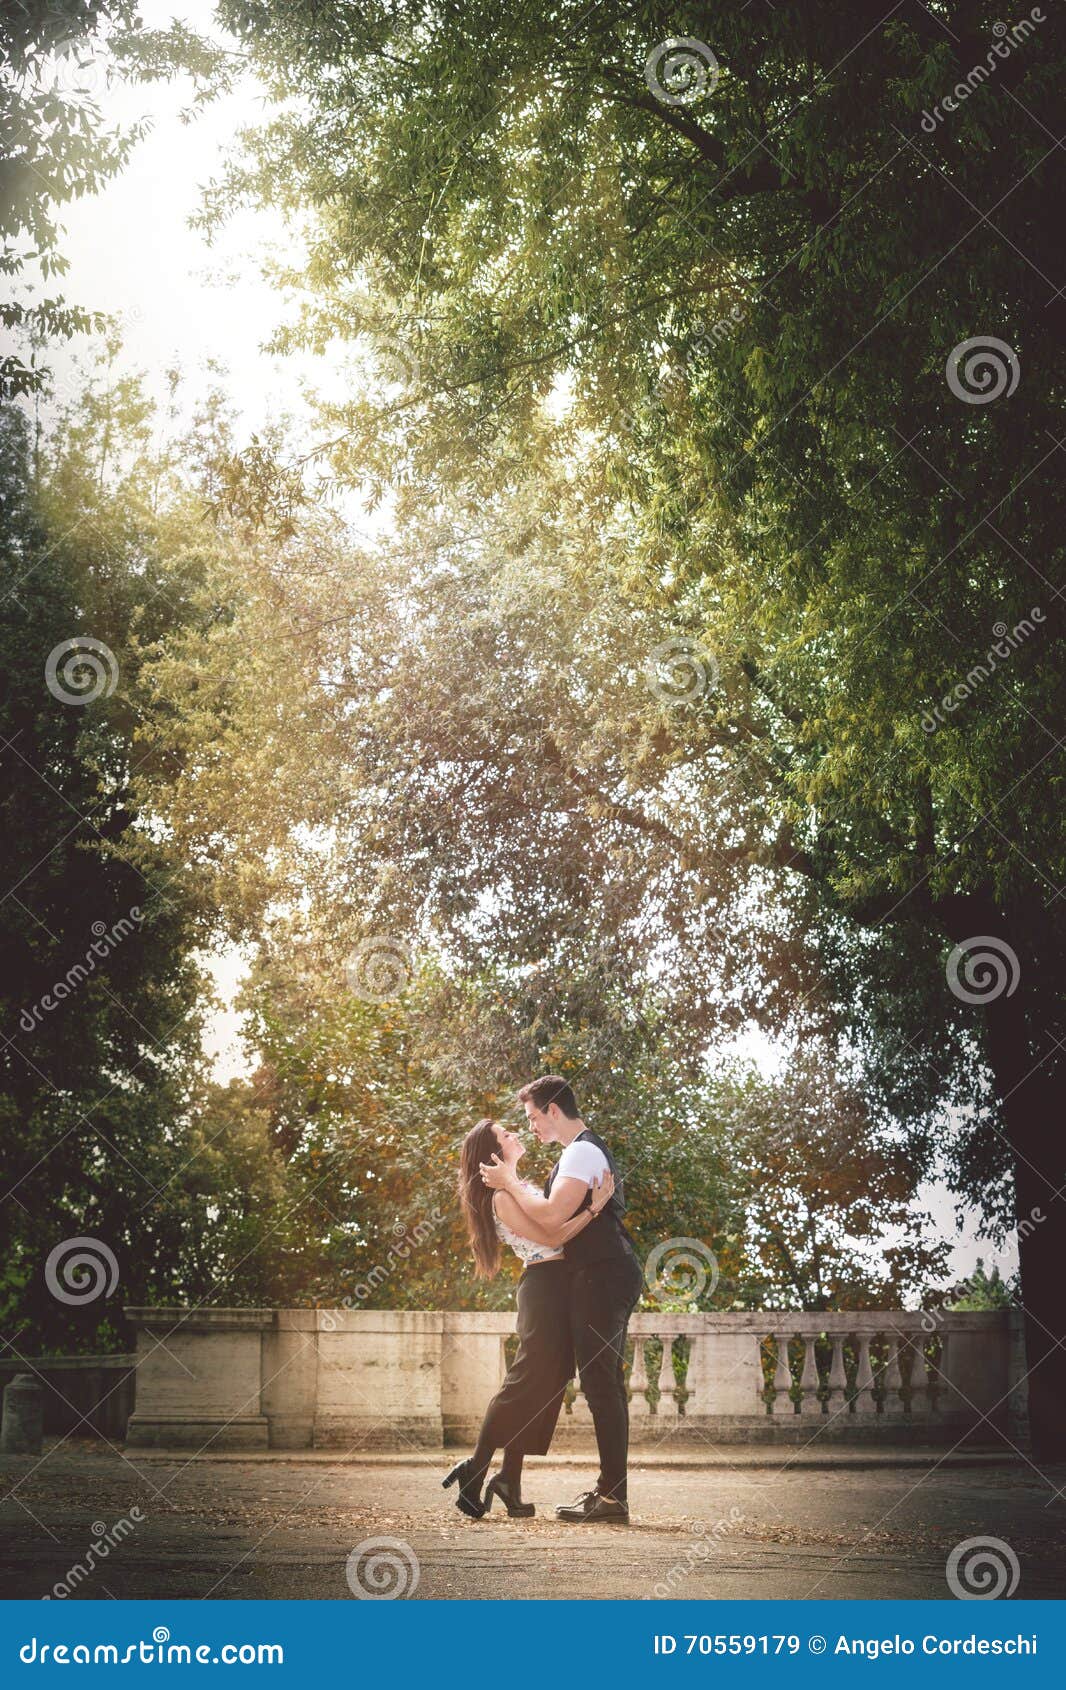 Young Couple Passion and Love Outdoor. Trees and Nature. Natural Love Stock Image - Image of kiss, female: